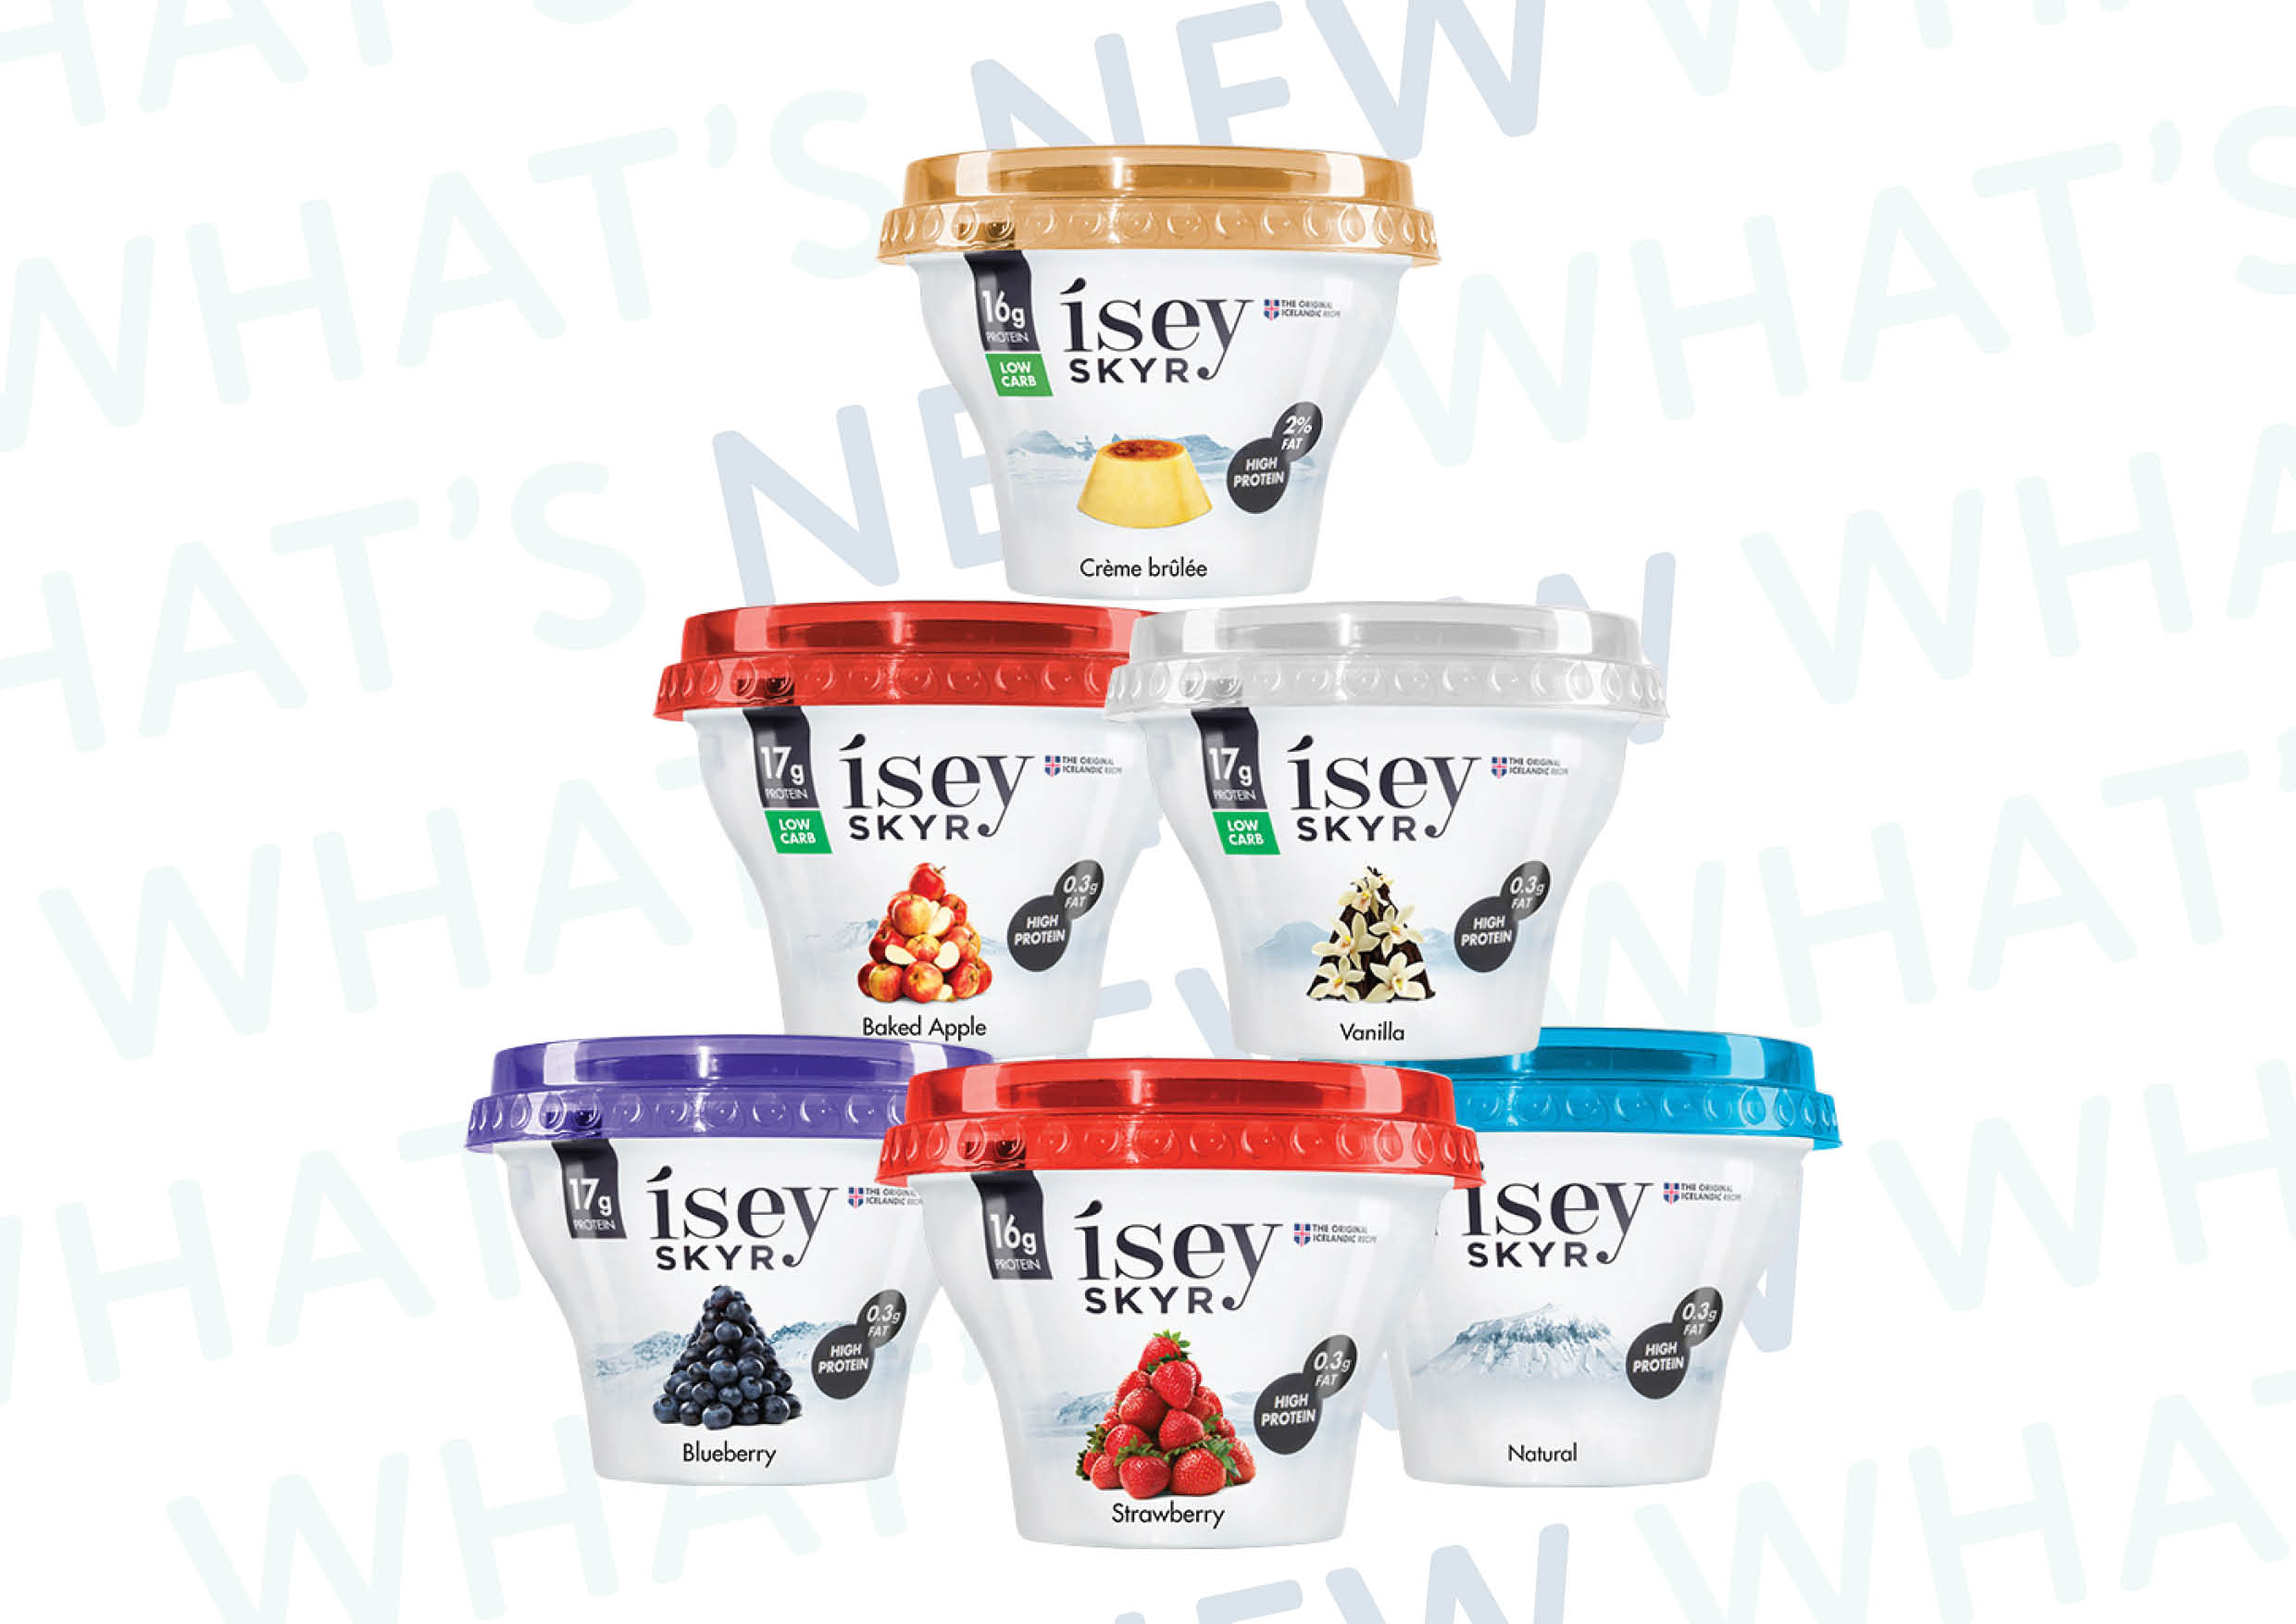 ey Skyr is a remarkable dairy product that is rich in protein, naturally low in fat and deliciously smooth & creamy. Isey Skyr is available now in the chiller at selected New World, Pak’nSave, Four Square and Fresh Choice supermarkets.